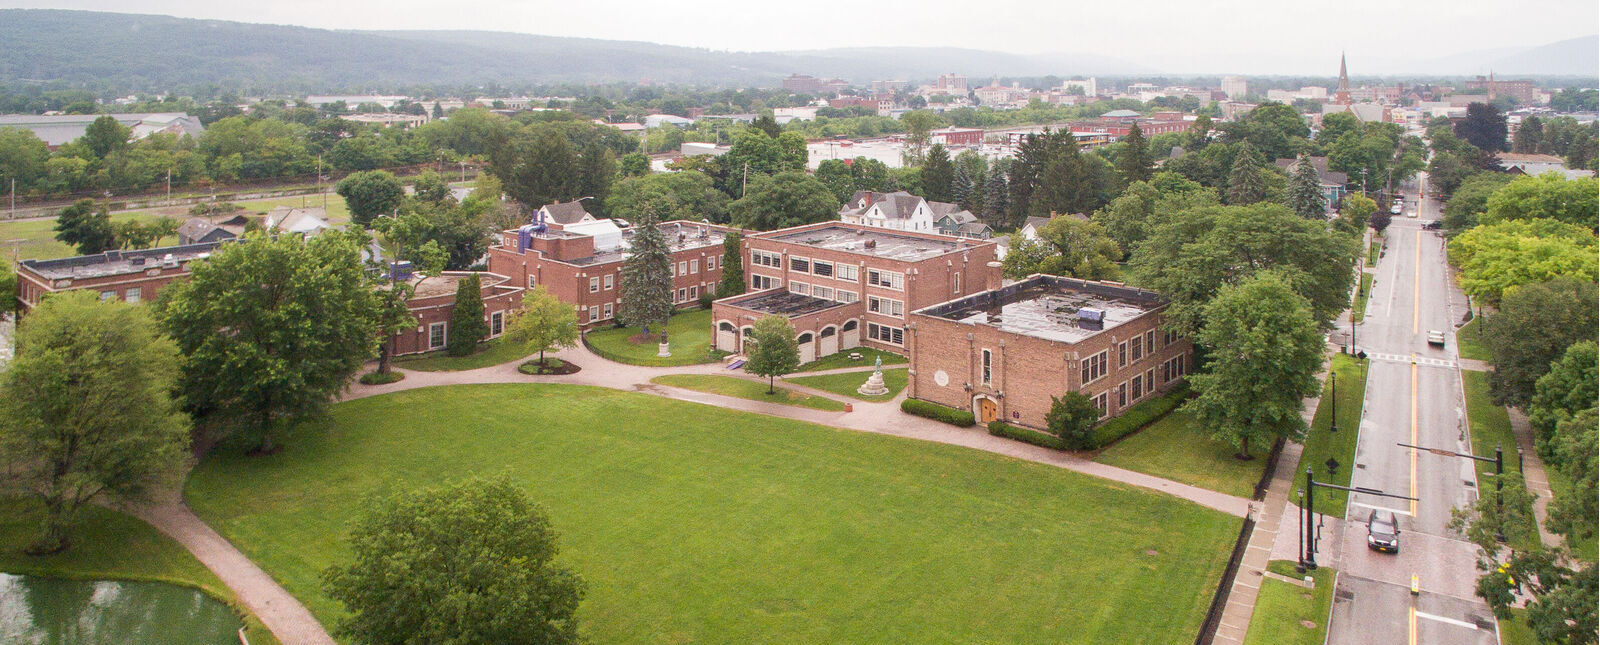 An overview of the Elmira College campus and College Avenue